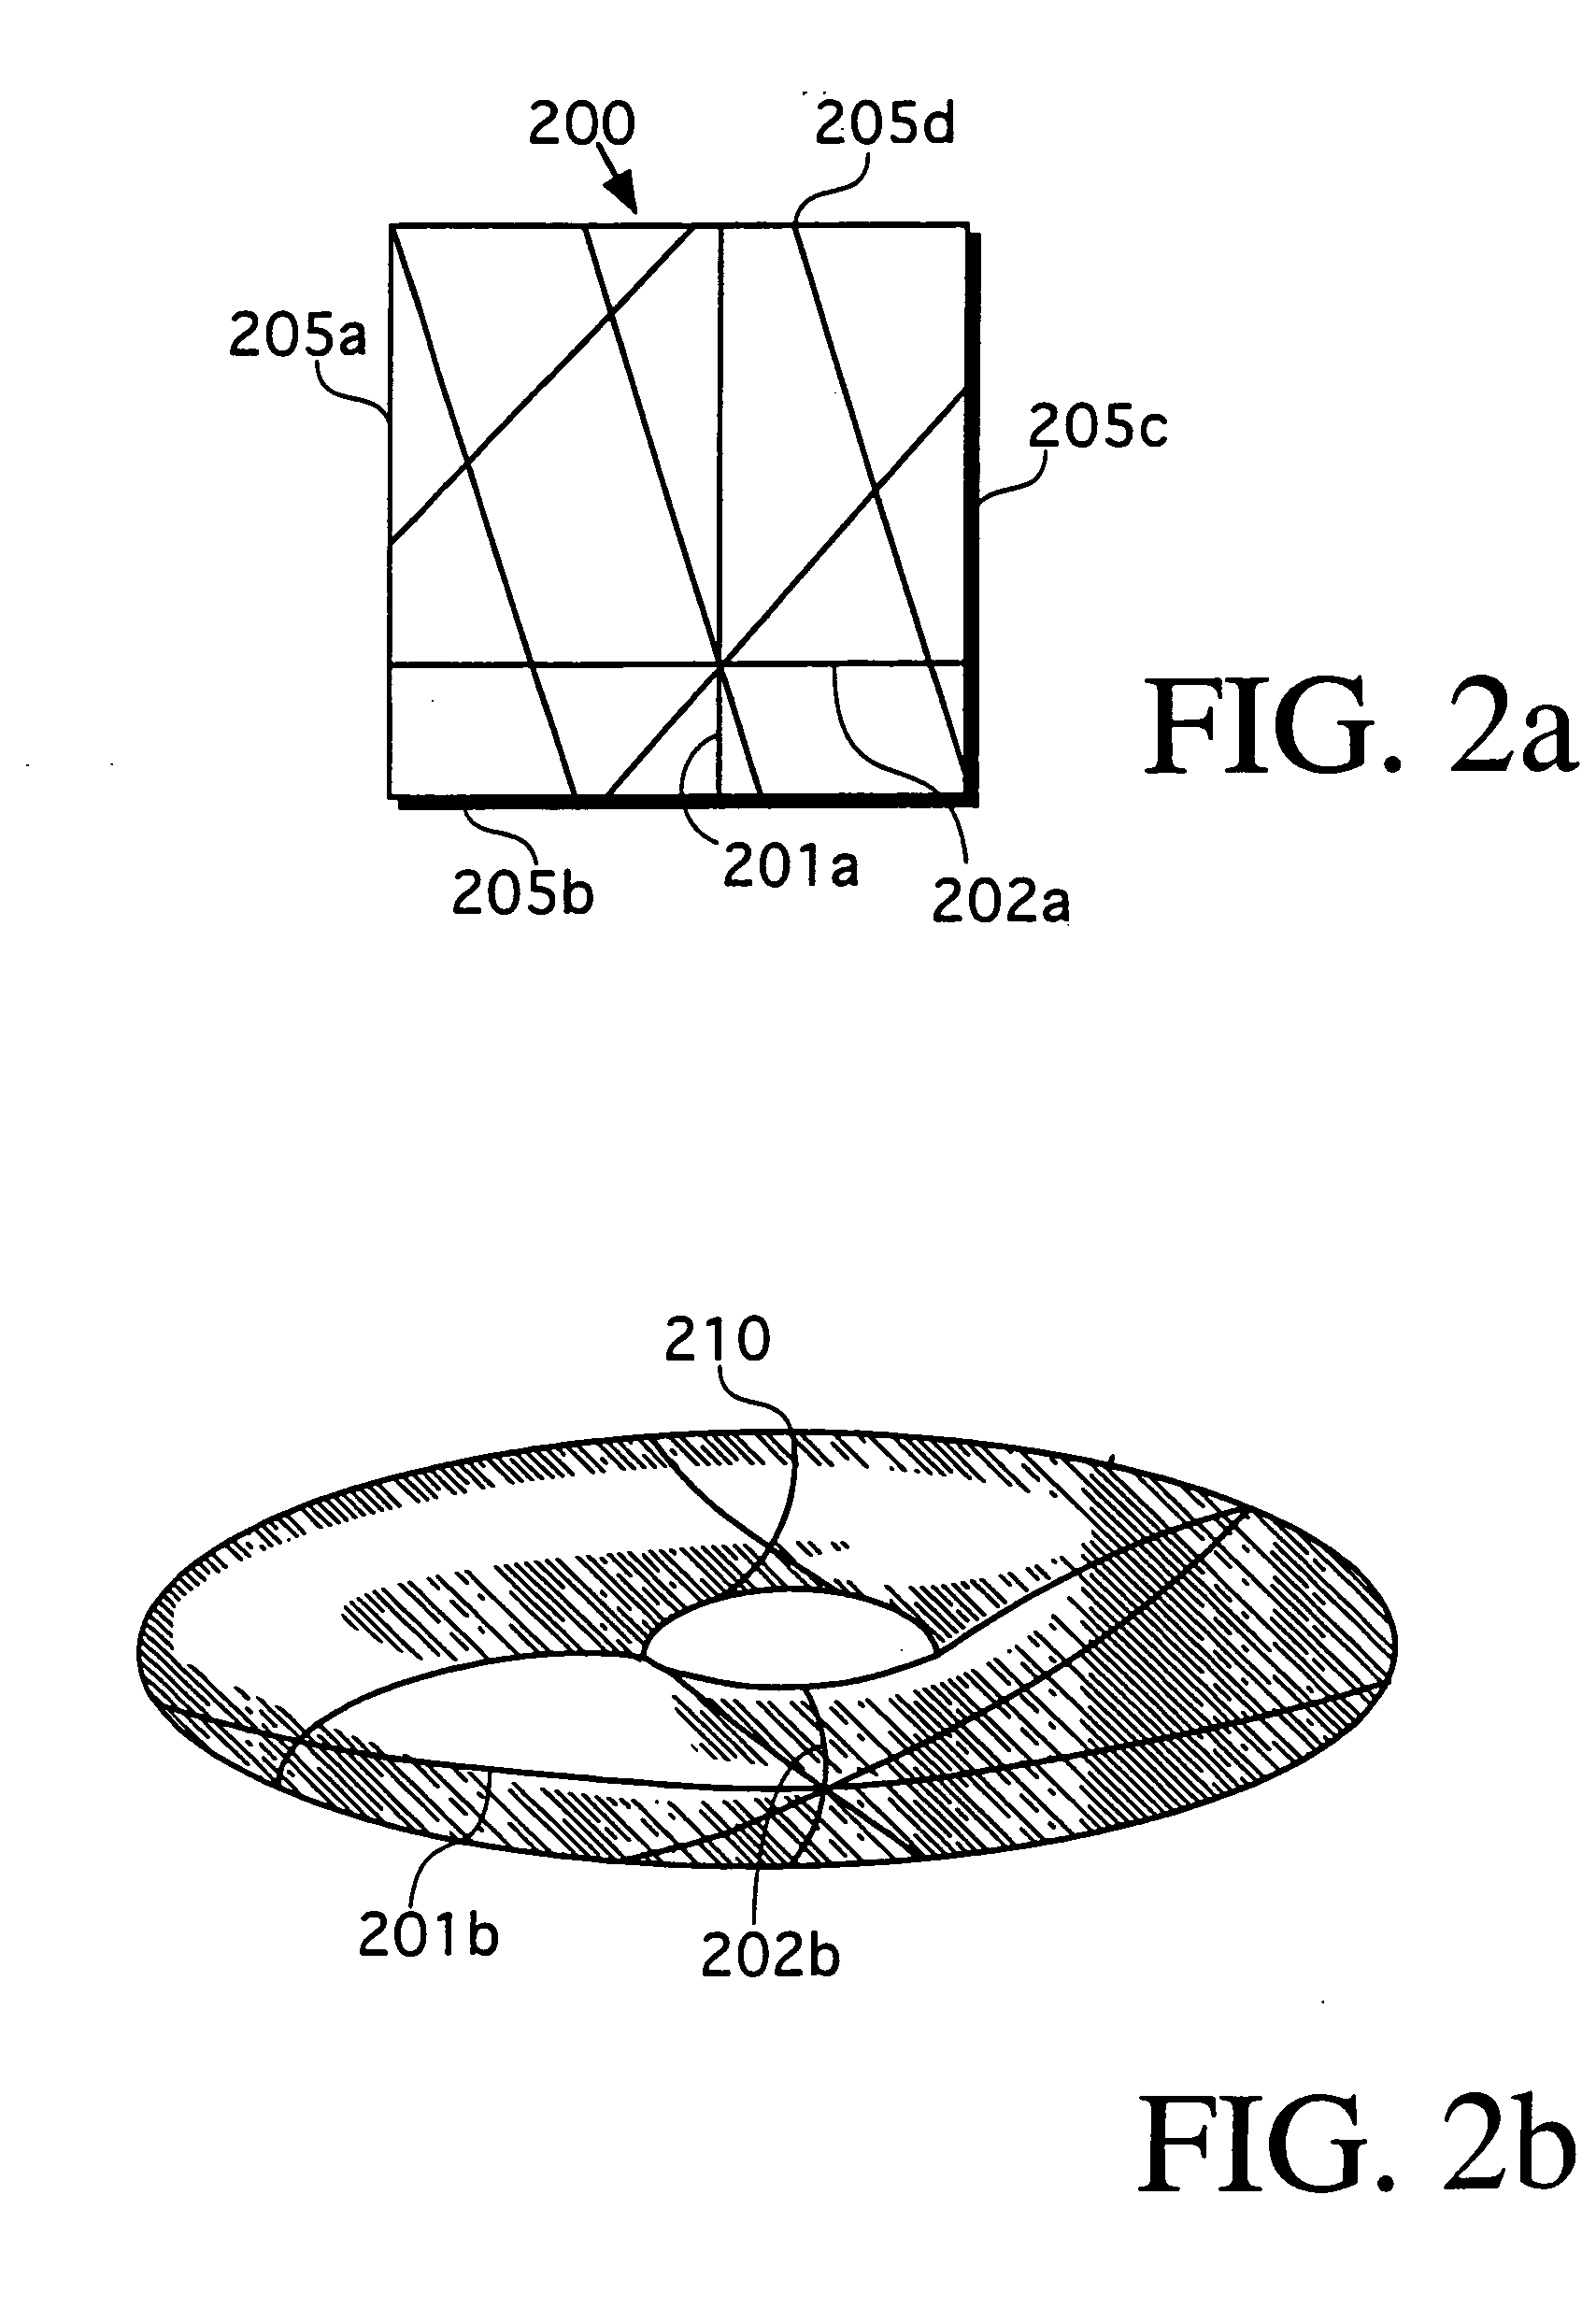 Method and apparatus of using neural network to train a neural network